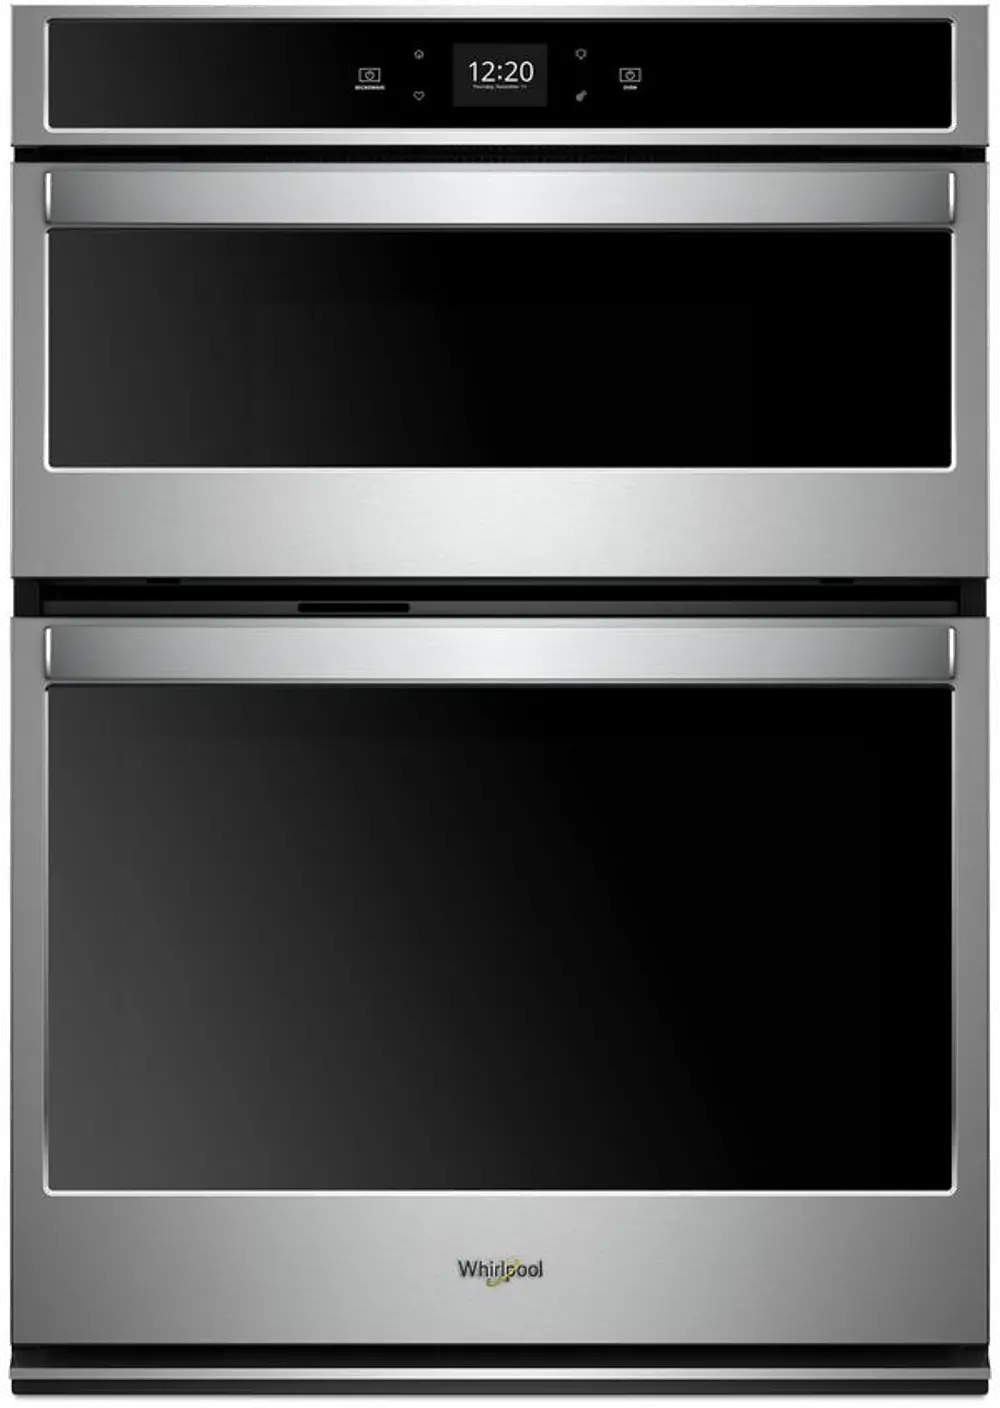 WOC54EC0HS Whirlpool 6.4 cu ft Combination Wall Oven - Stainless Steel 30 Inch-1